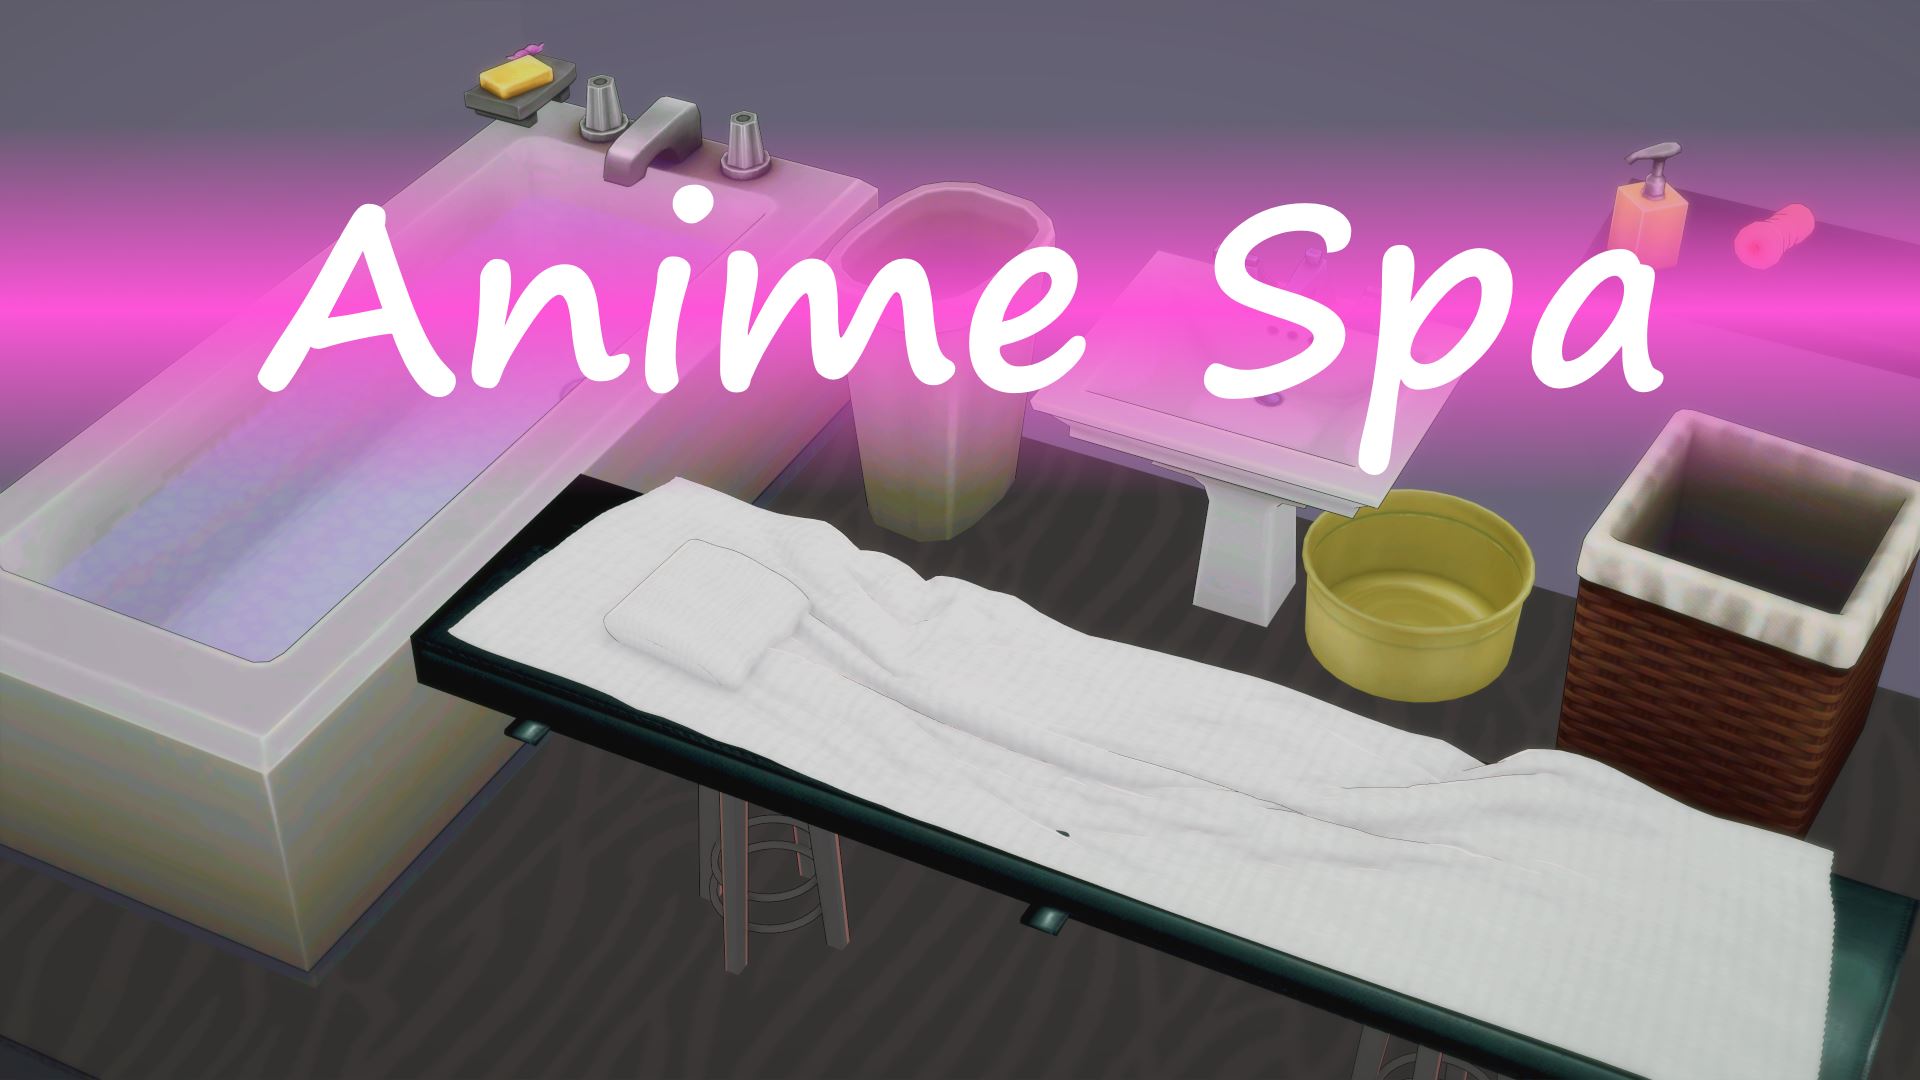 Anime Spa [Finished] - Version: Final